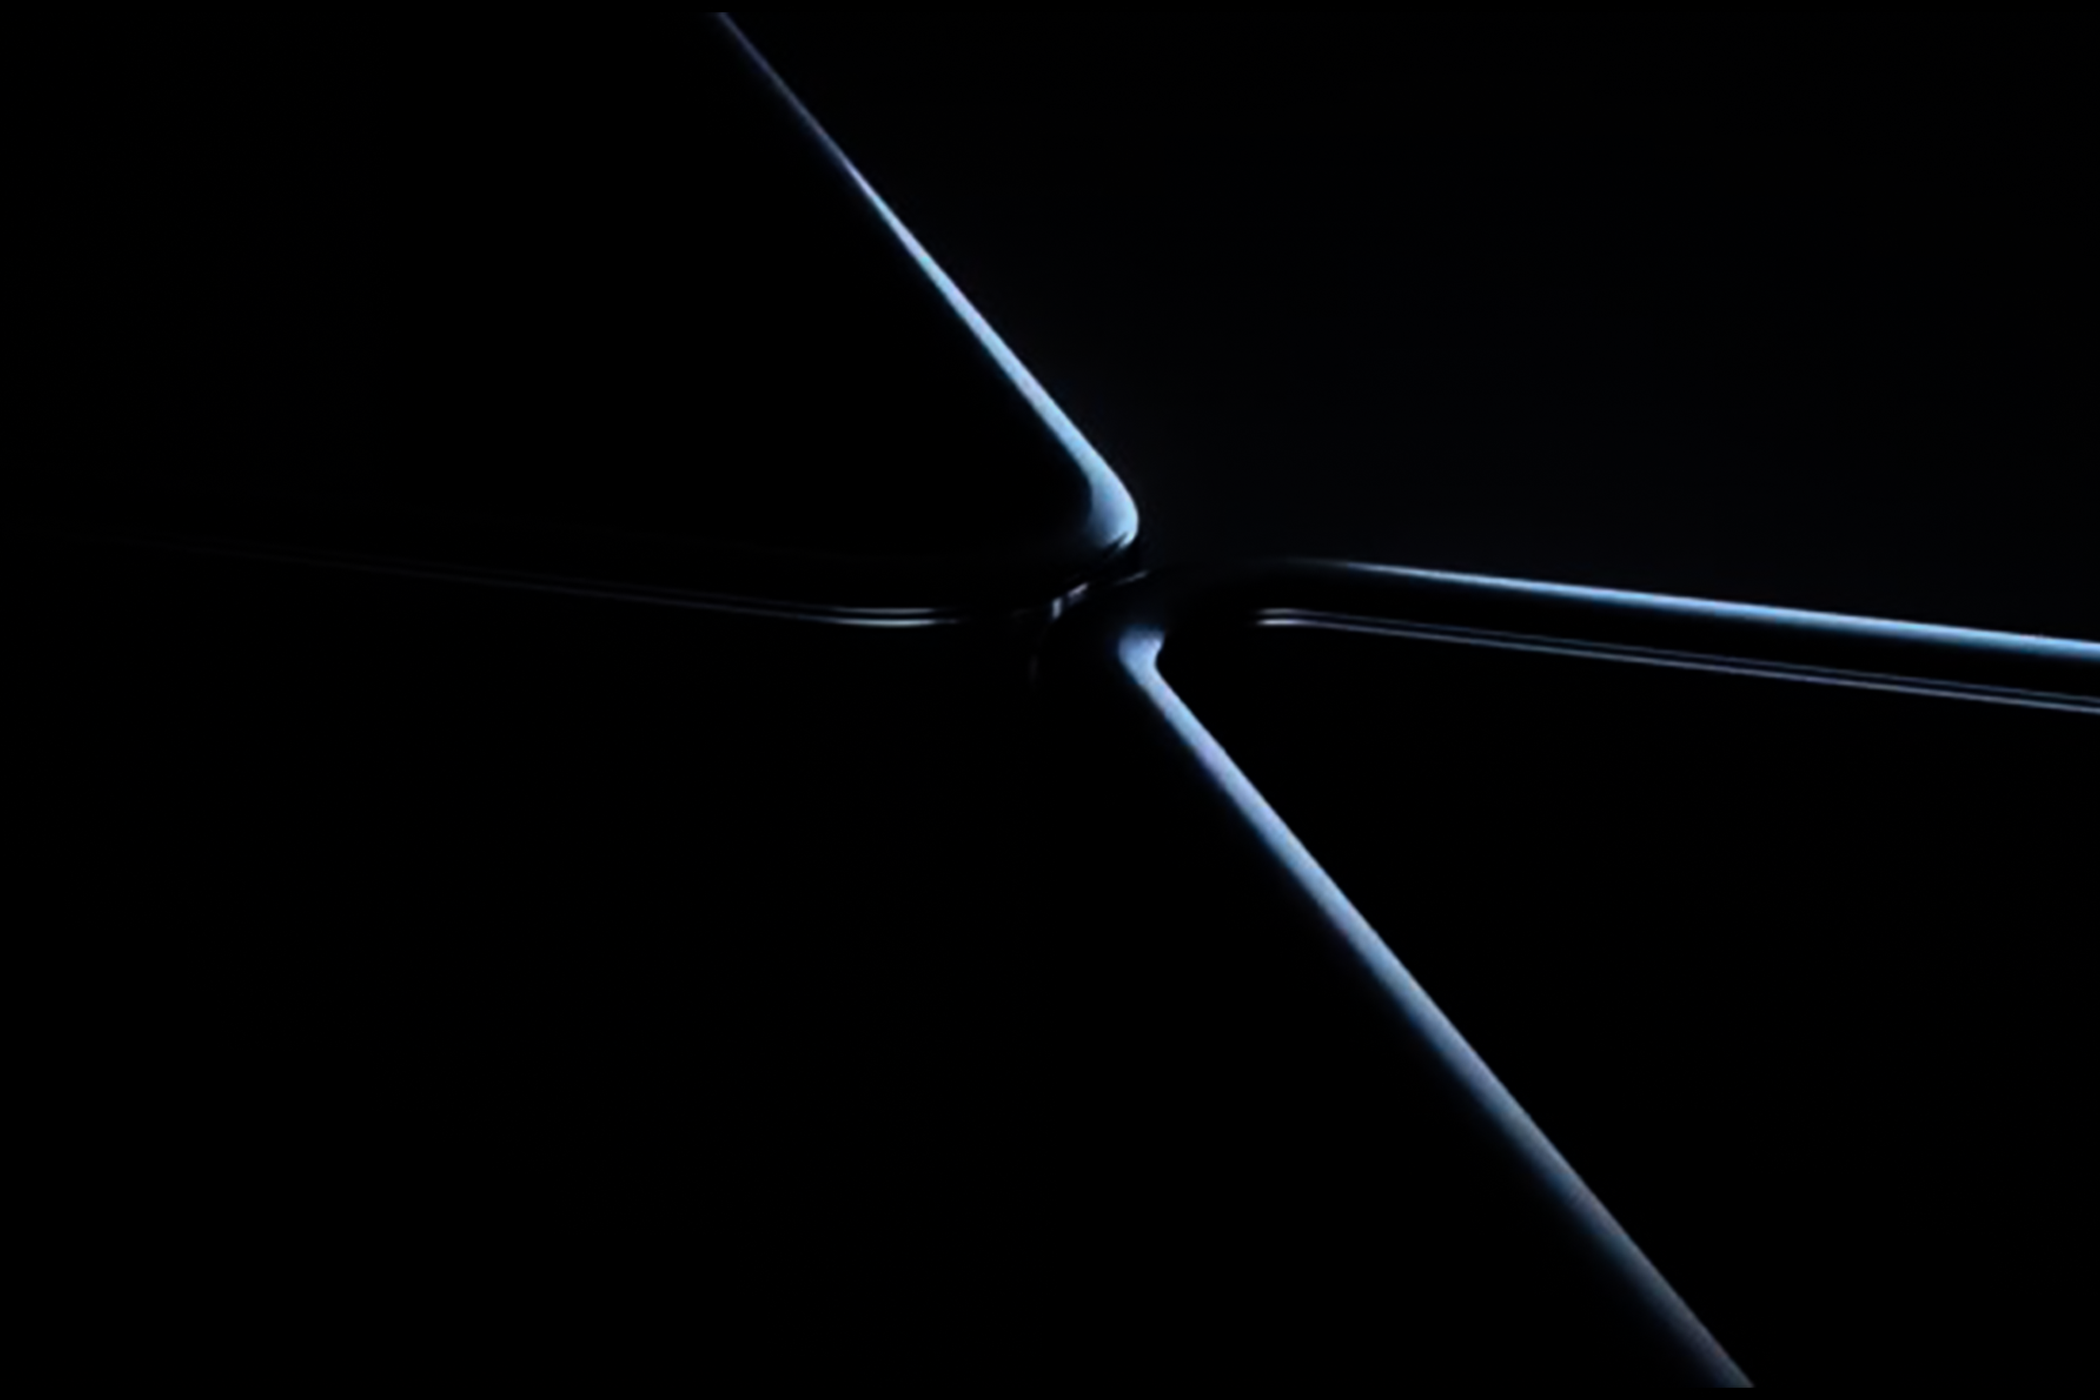 Teaser image of a foldable device from OnePlus.